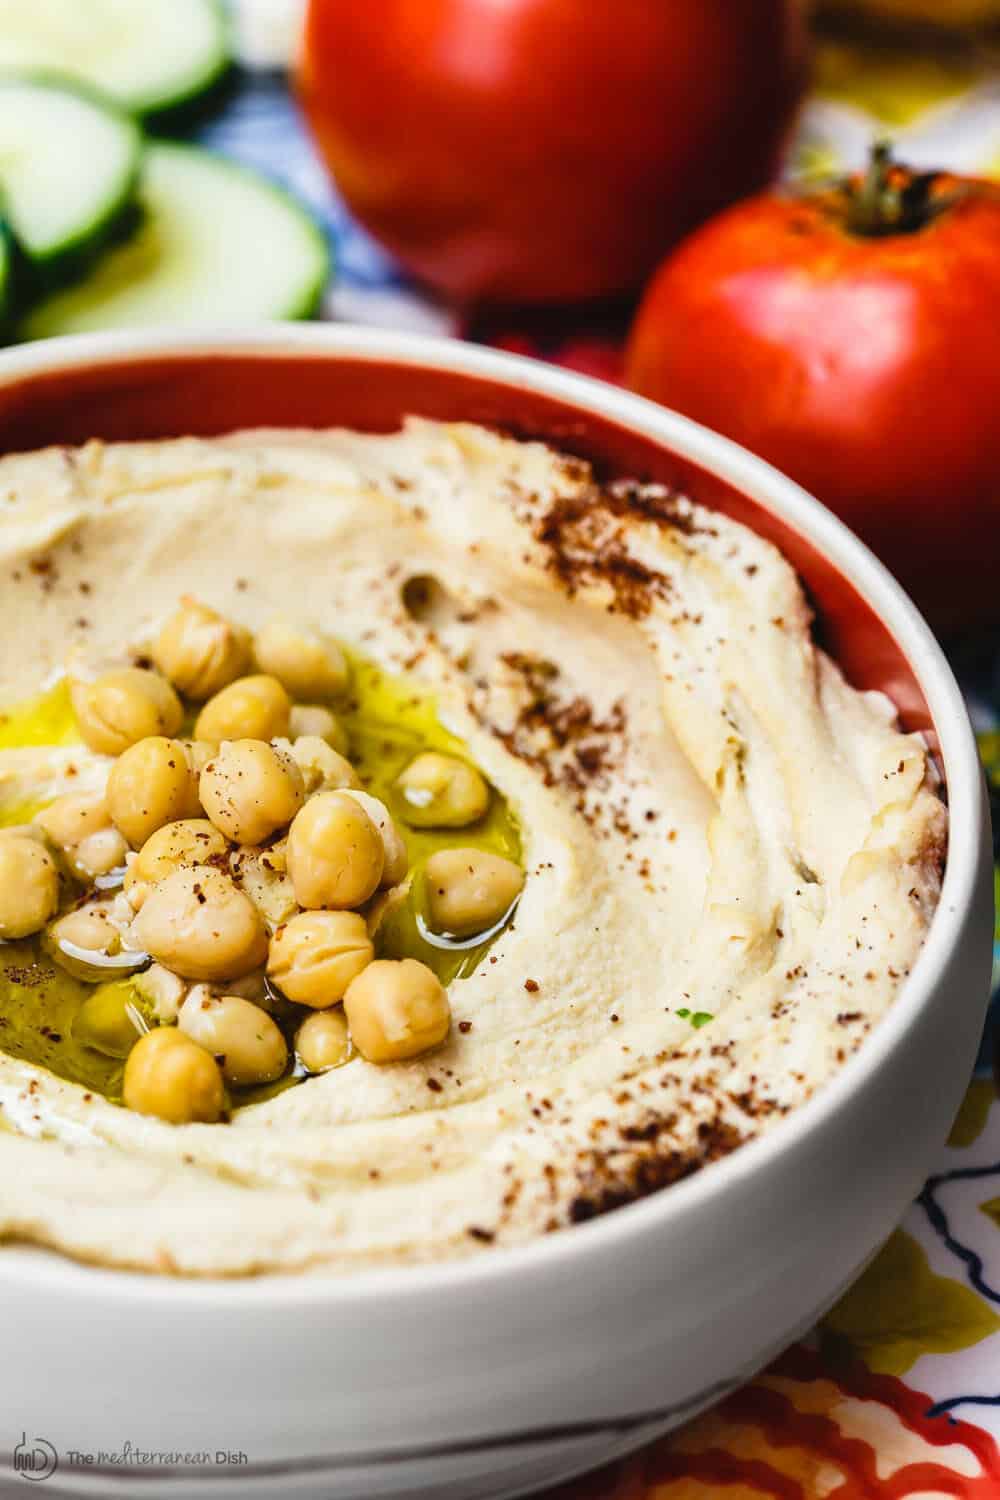 How to Make Hummus from Scratch | The Mediterranean Dish. BEST hummus recipe you will find! A few tricks and a video tutorial takes you through how to make the best, thick, smooth, rich, and ultra cream hummus you will find. Vegan. Gluten free. This hummus dip is a must try from TheMediterraneanDish.com #hummus #hummusrecipe #dip #hummusdip #veganrecipes #glutenfreerecipes #mediterraneandiet #mediterraneanrecipes #middleeasternrecipes